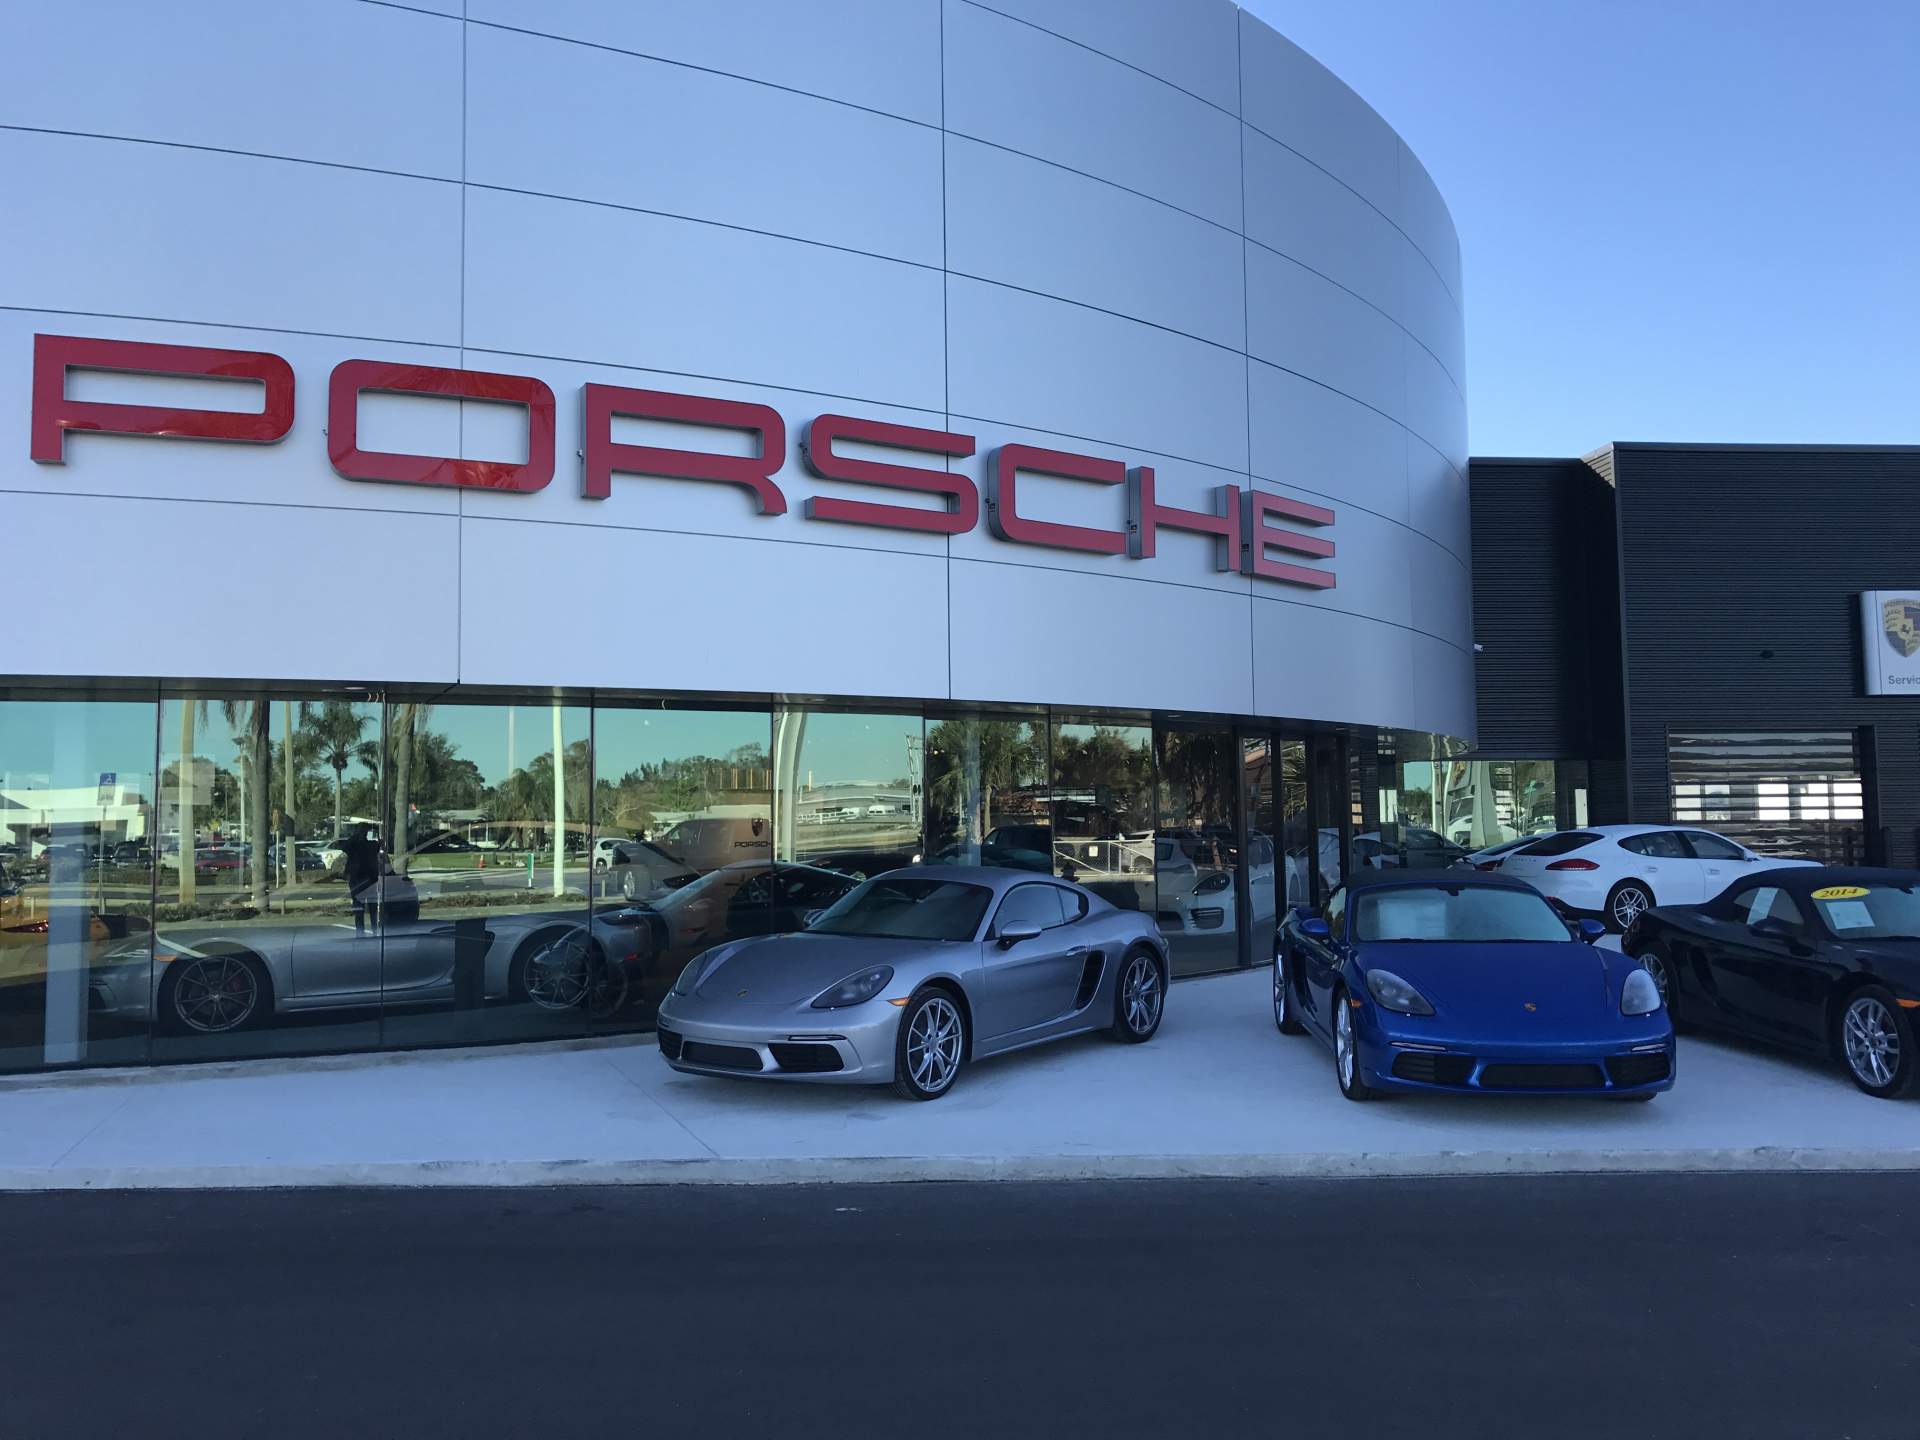 Porche dealership showroom and offices in Melbourne, FL